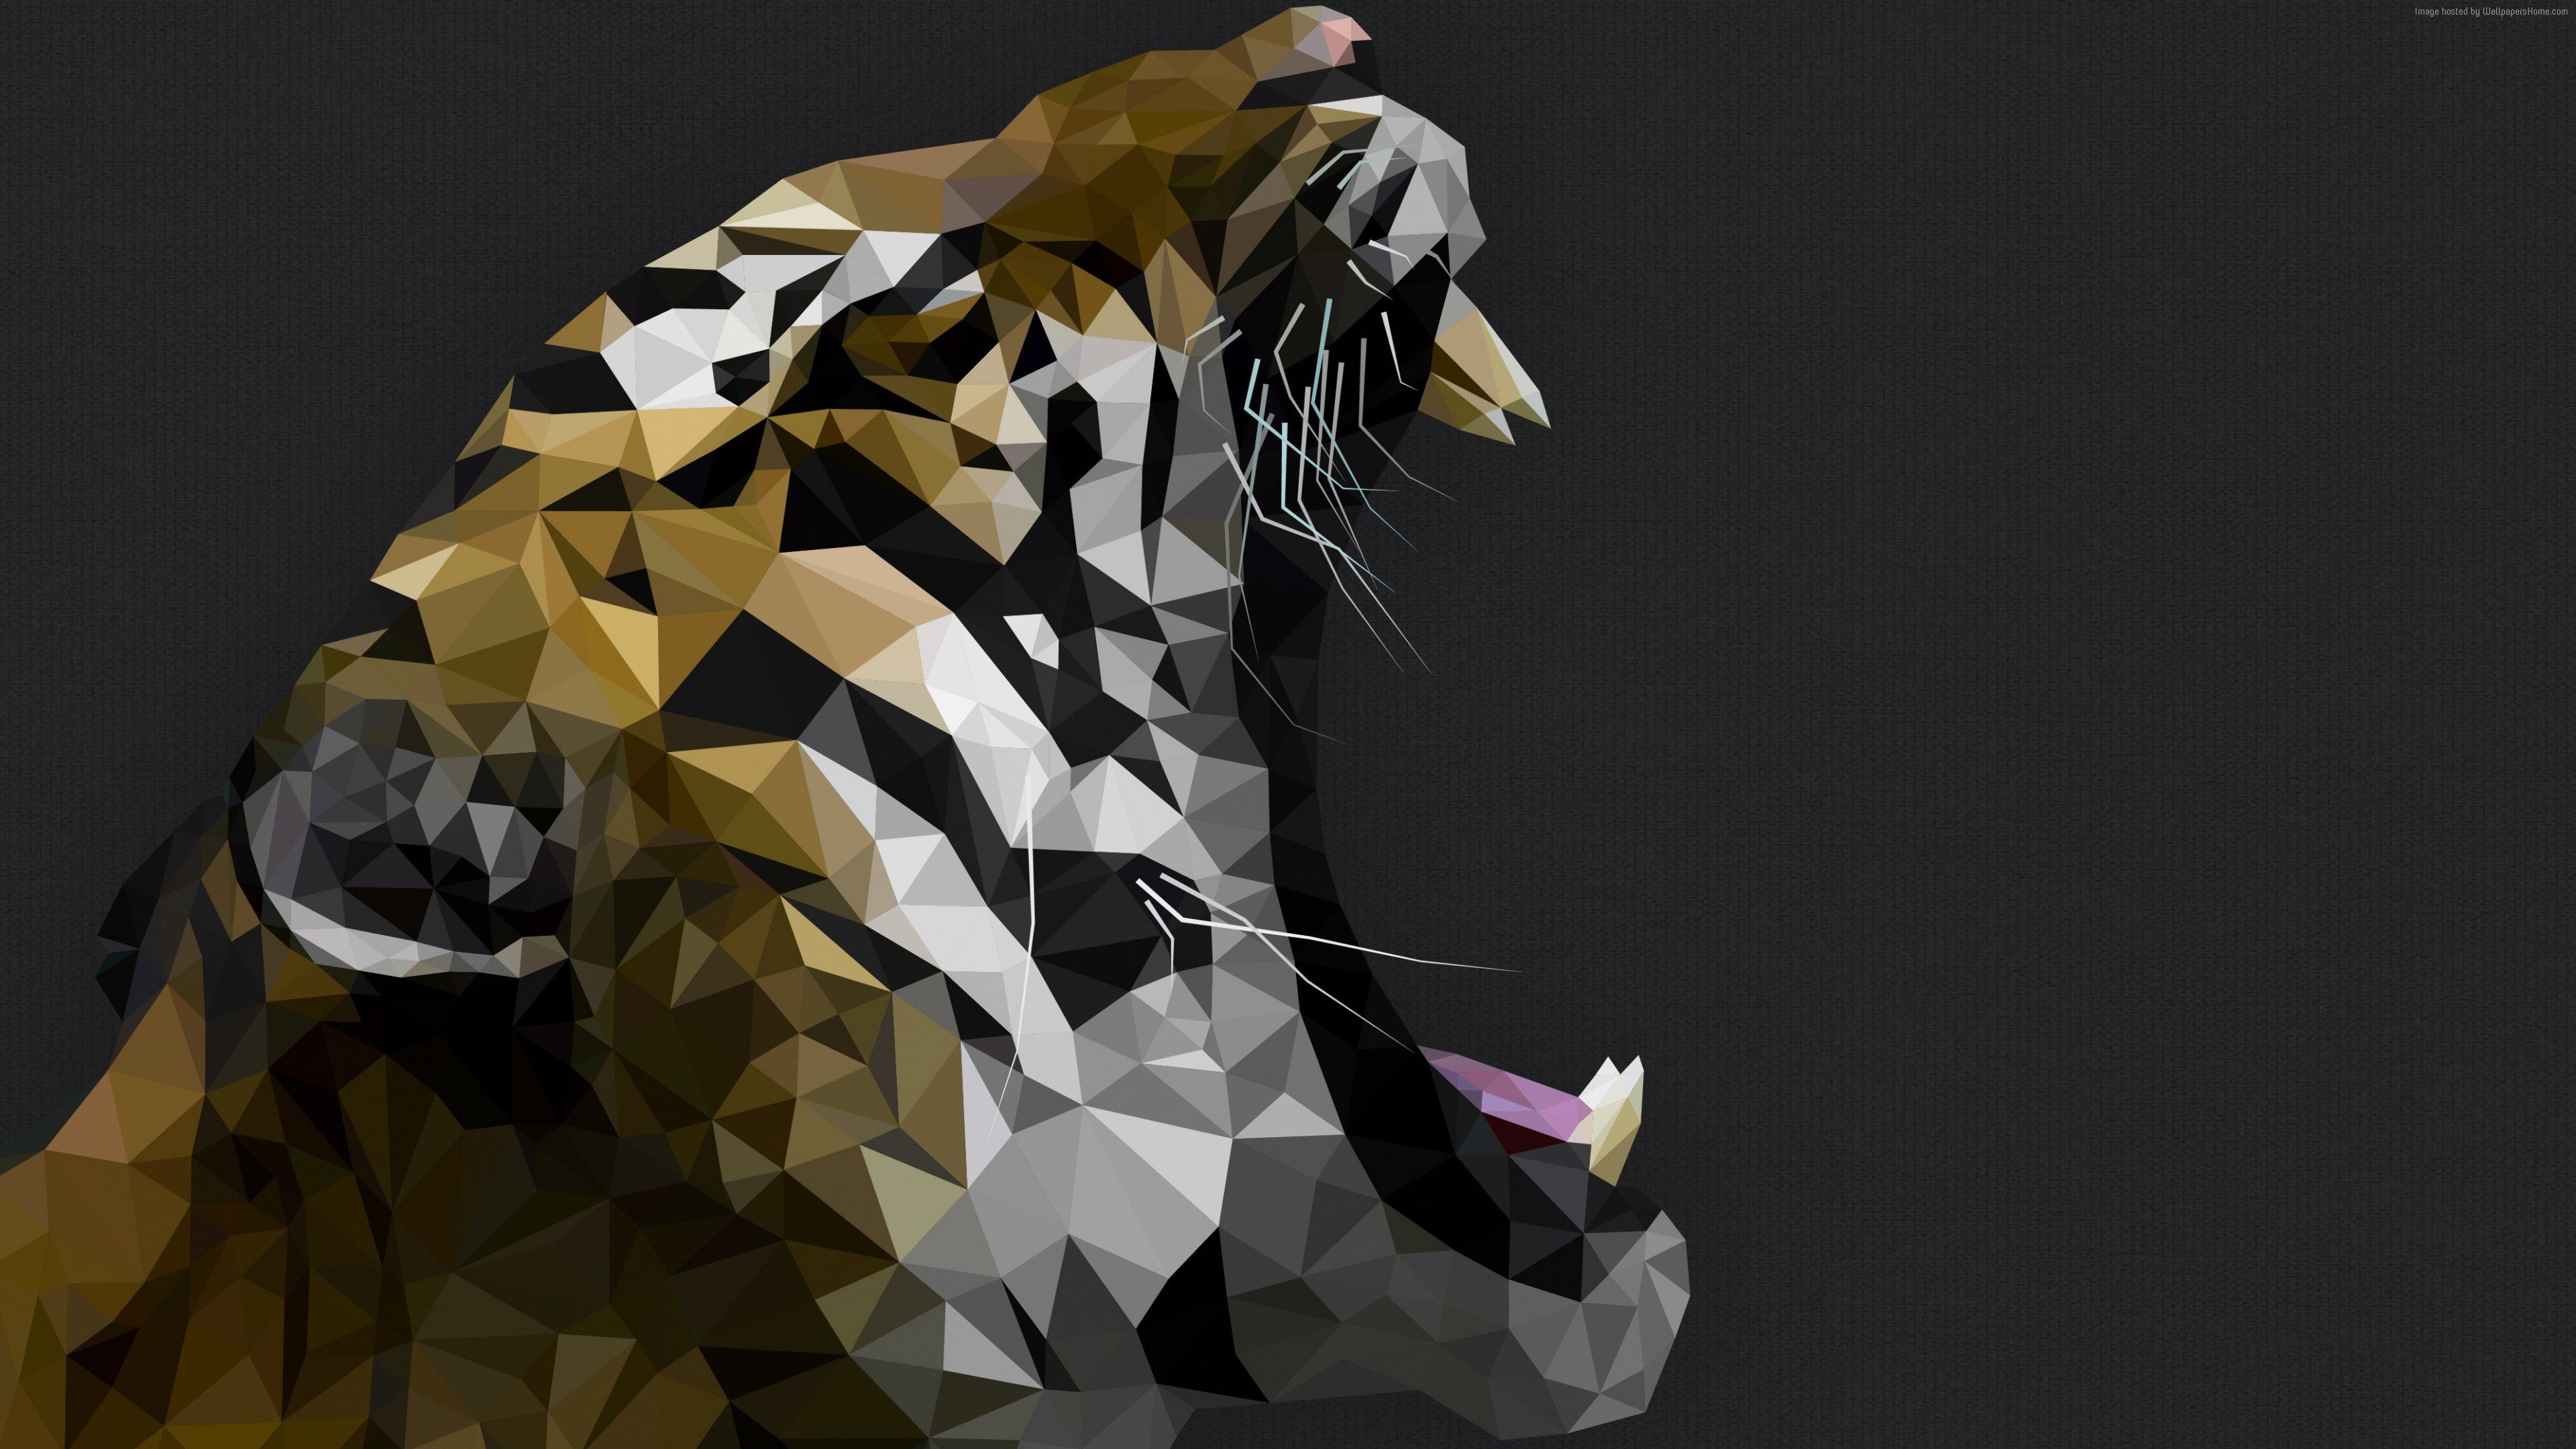 Low poly tiger wallpaper 2560x1440 for download - Low poly